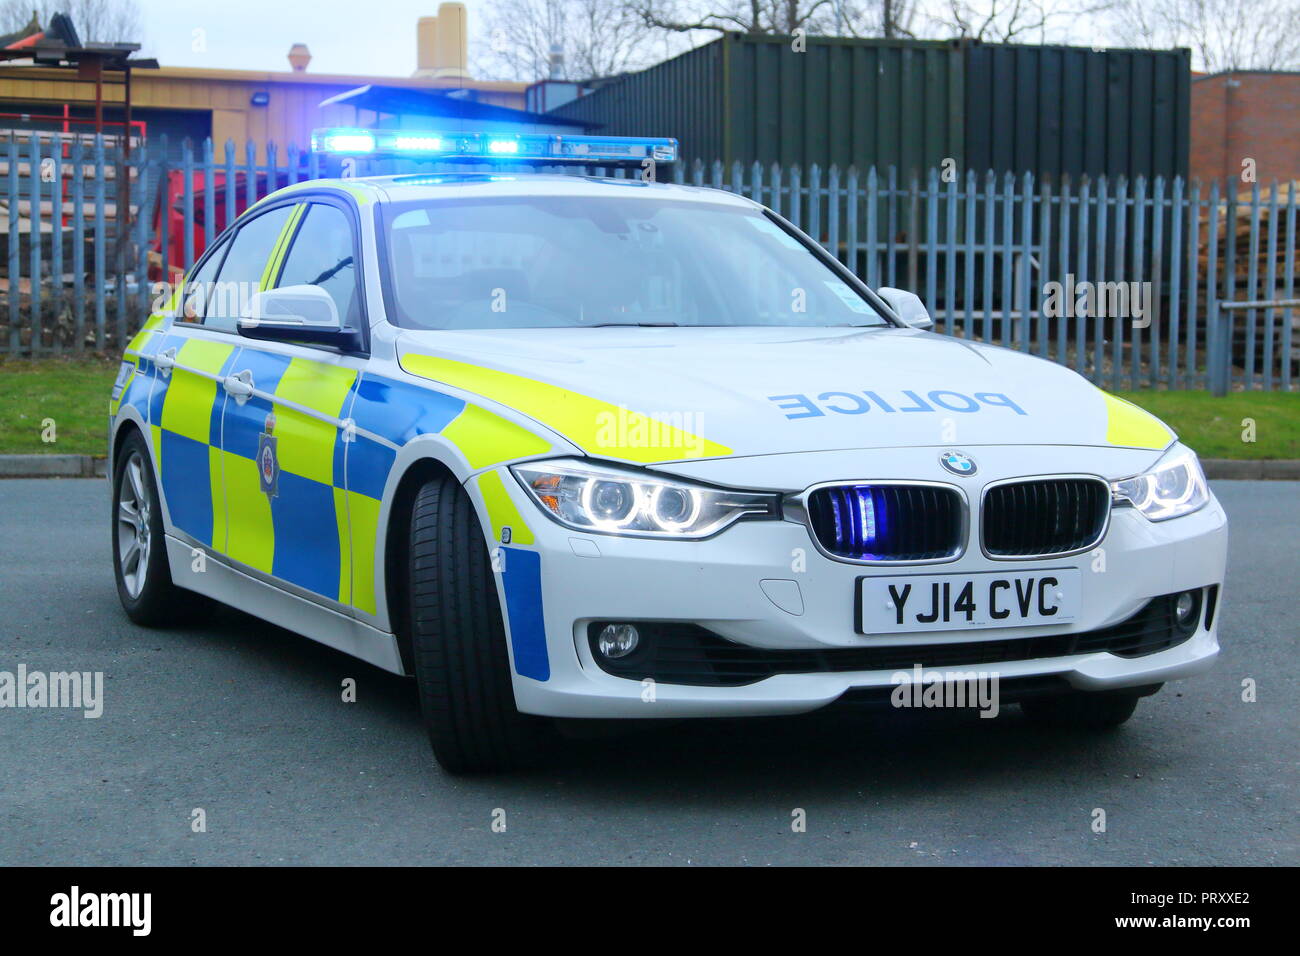 A BMW Police Car from West Yorkshire Police at an incident in Garforth, Leeds, West Yorkshire. Stock Photo